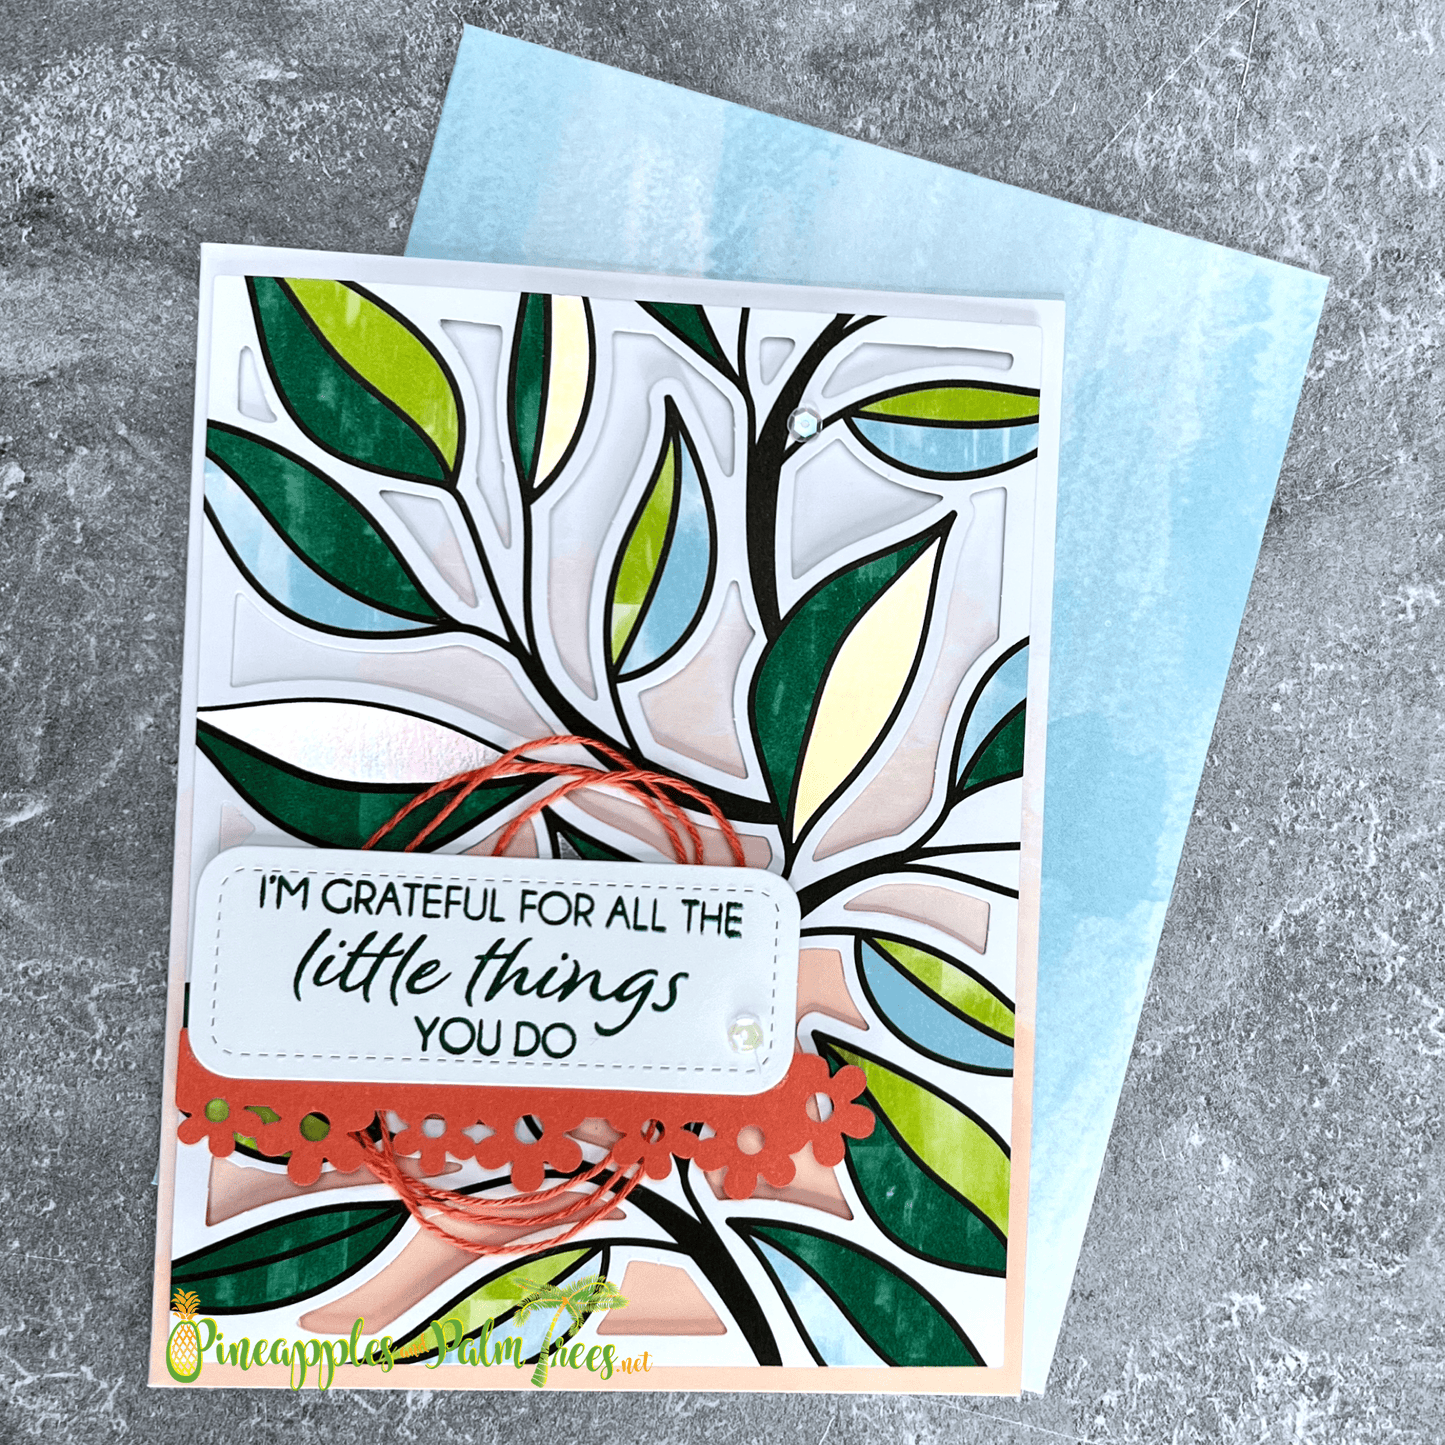 Greeting Card: I'm Grateful for All the Little Things You Do - leaves